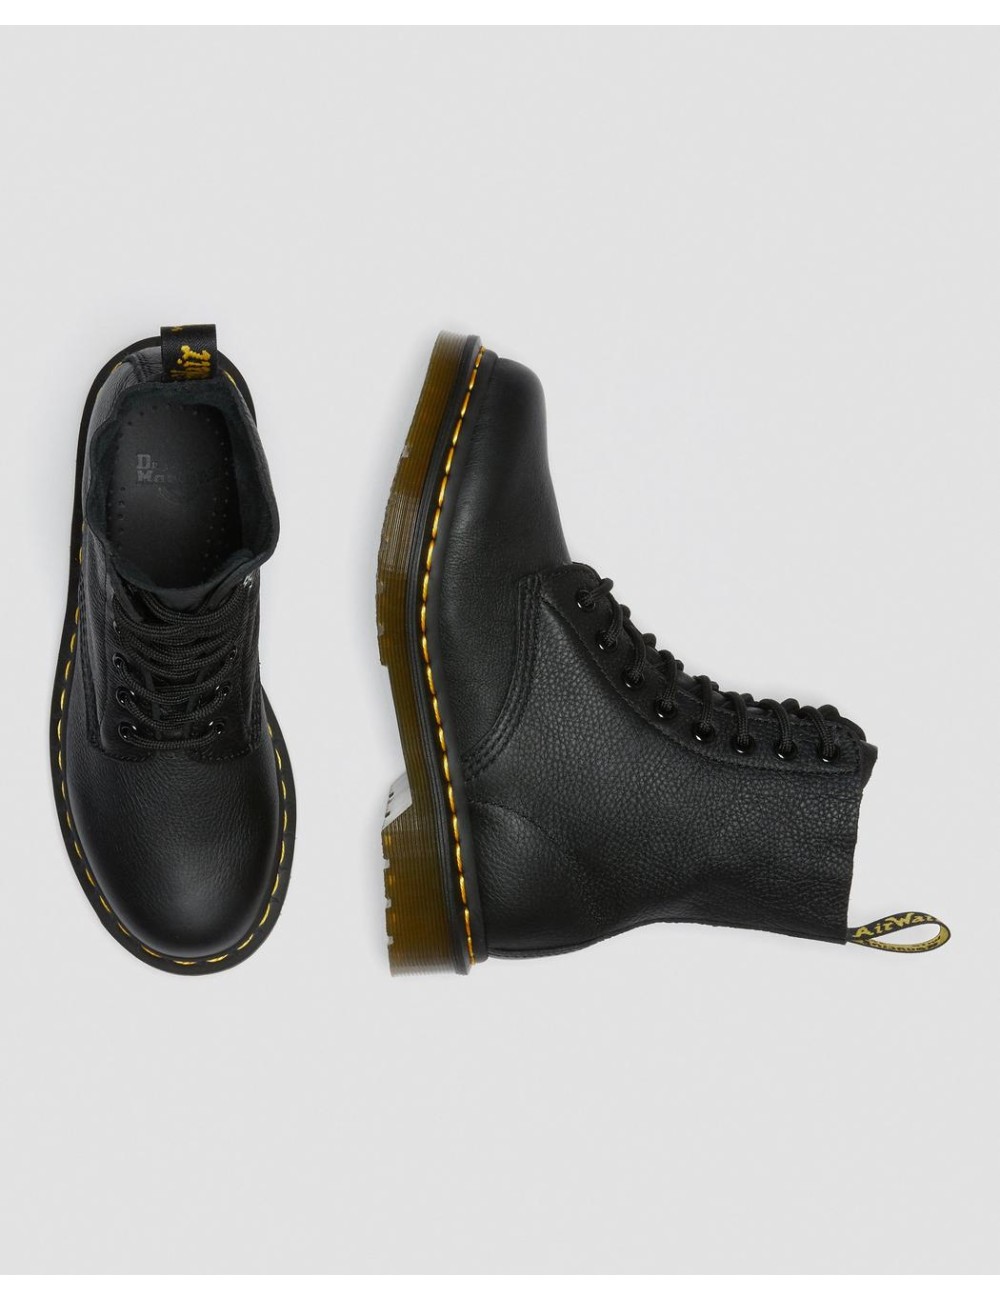 DR MARTENS 1460 PASCAL VIRGINIA LEATHER LACE UP BOOTS